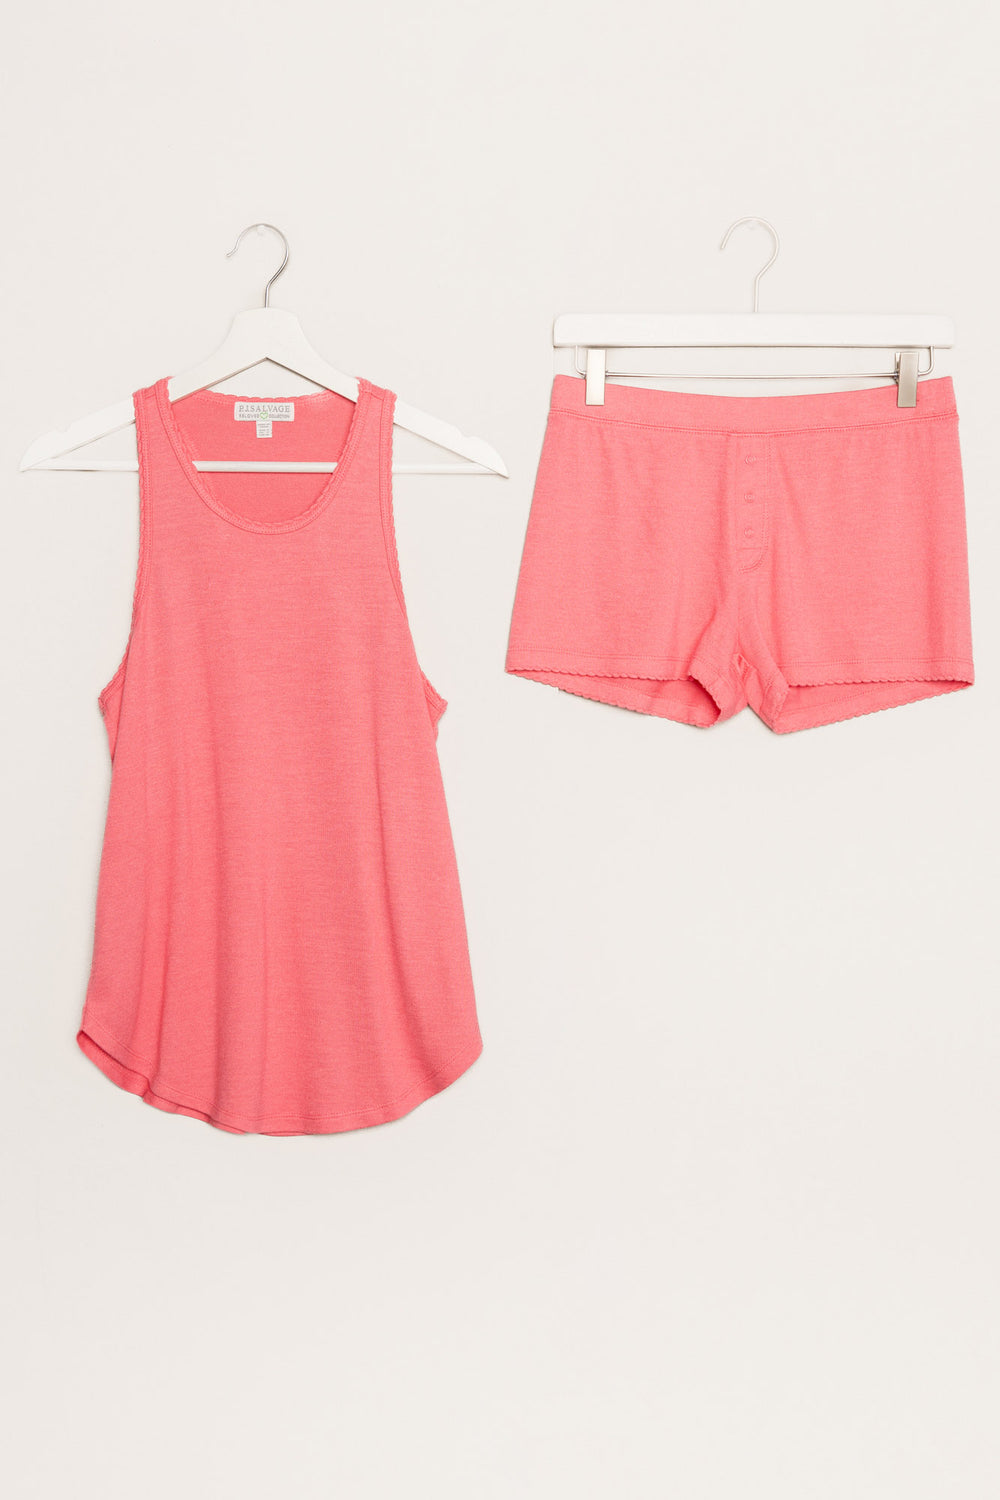 Coral pink racer-back tank top & sleep short set in soft Repreve jersey knit. (7122610651236)